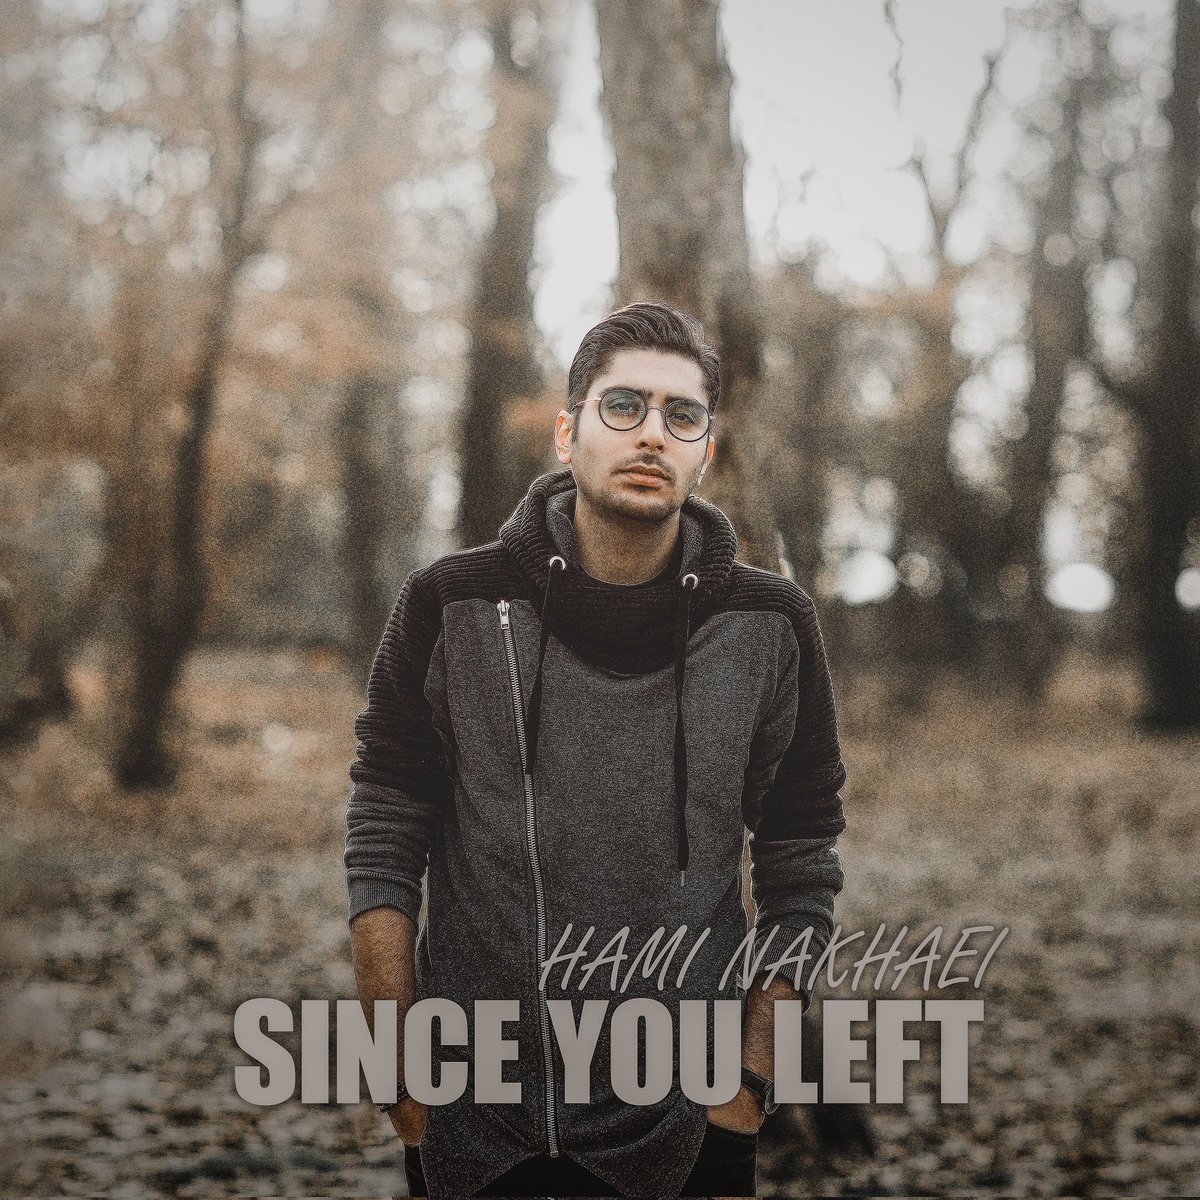 Now you can Listen to “Since You Left” by Hami Nakhaei 🎧 #billboard #guitar #spotify #limakrecords #smkrs #alwaysinthegame #dieslow #orejashiphop #bugs #bugsbunny #bugsbunnychallenge #jumpman23 #jumpman #street #swag #swagger #swaggy #swagstyle #nike #airjordan #jordan #retro1